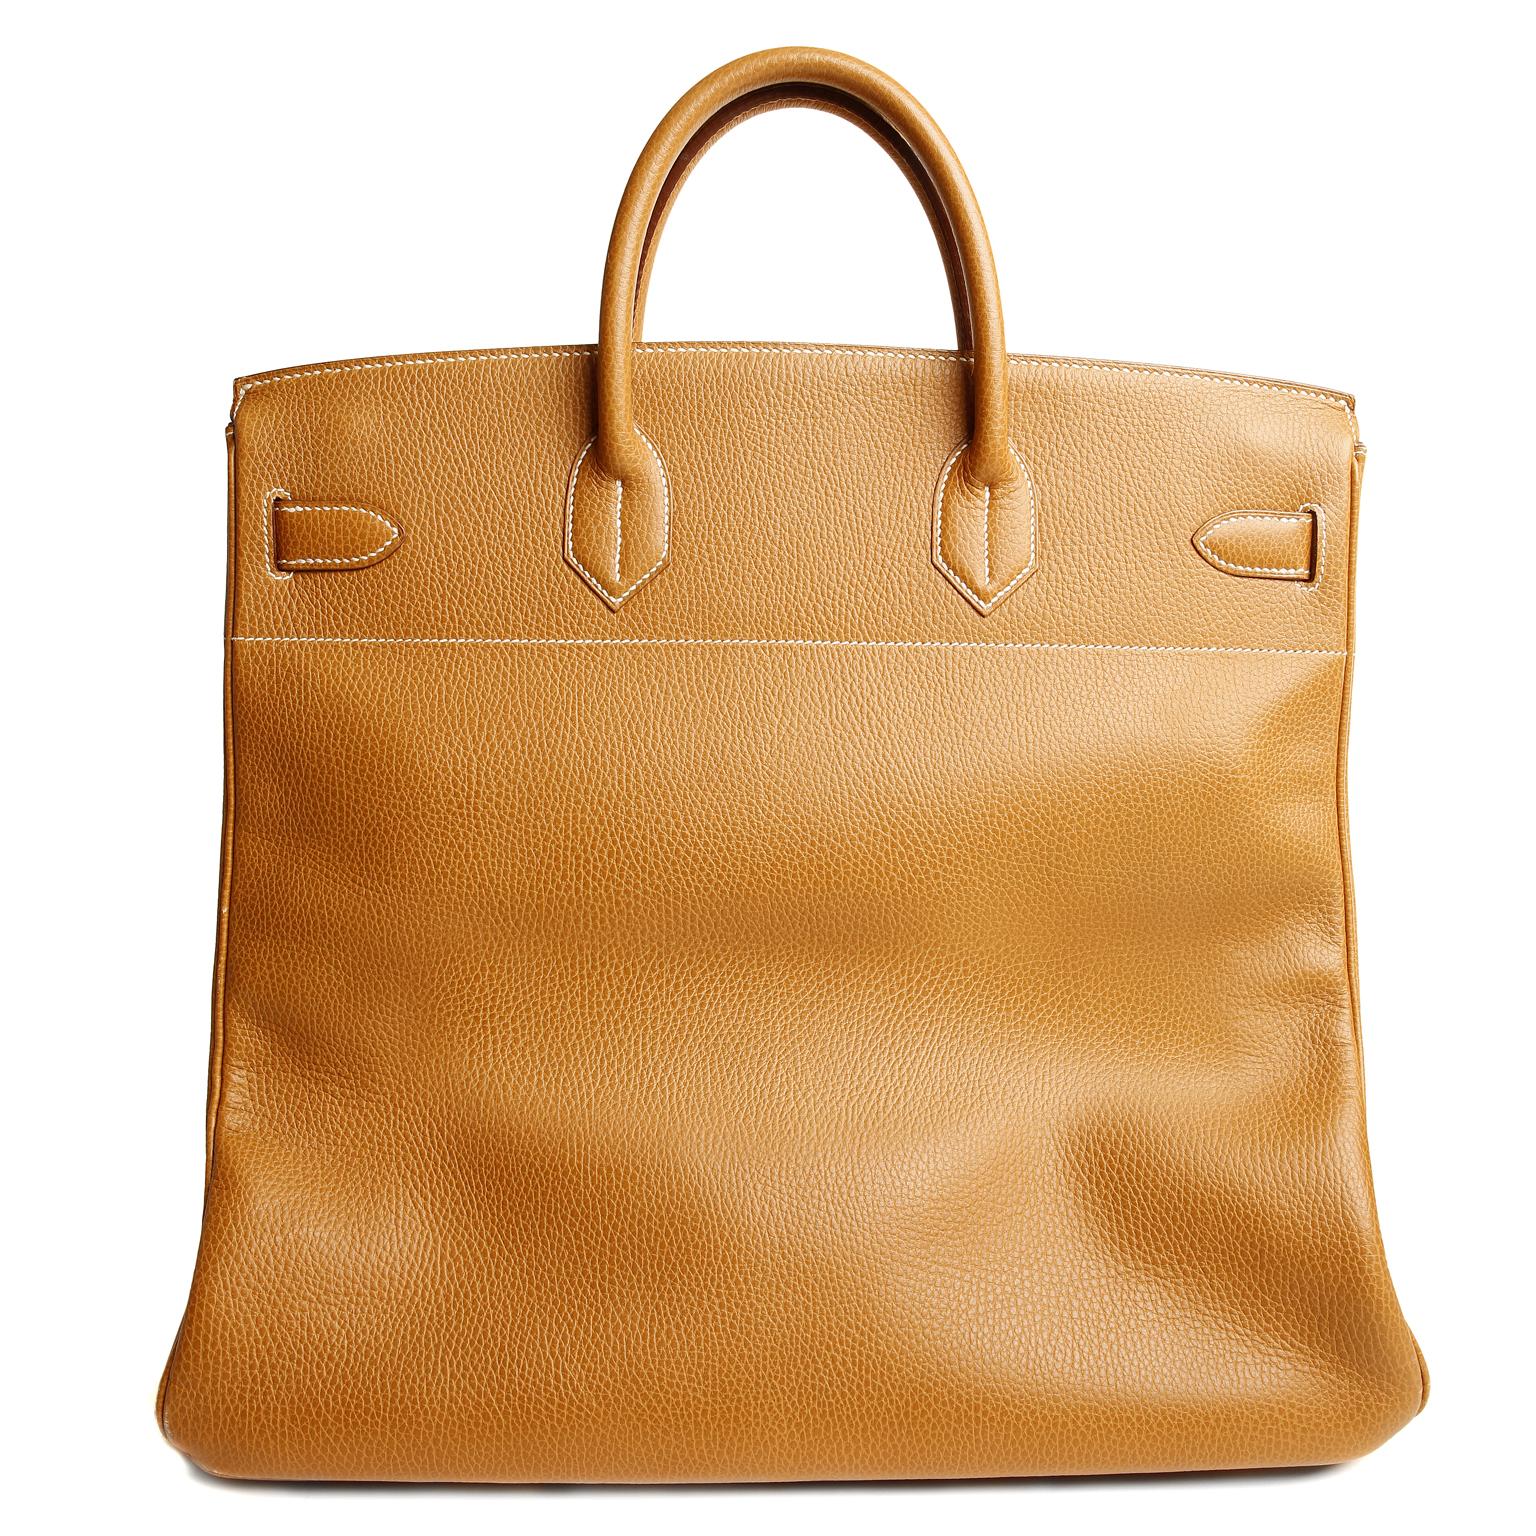 This authentic Hermès Natural Ardennes Leather HAC 45 is in Very beautiful condition. Considered the ultimate luxury item the world over and hand stitched by skilled craftsmen, wait lists of a year or more are commonplace for Hermès bags. This